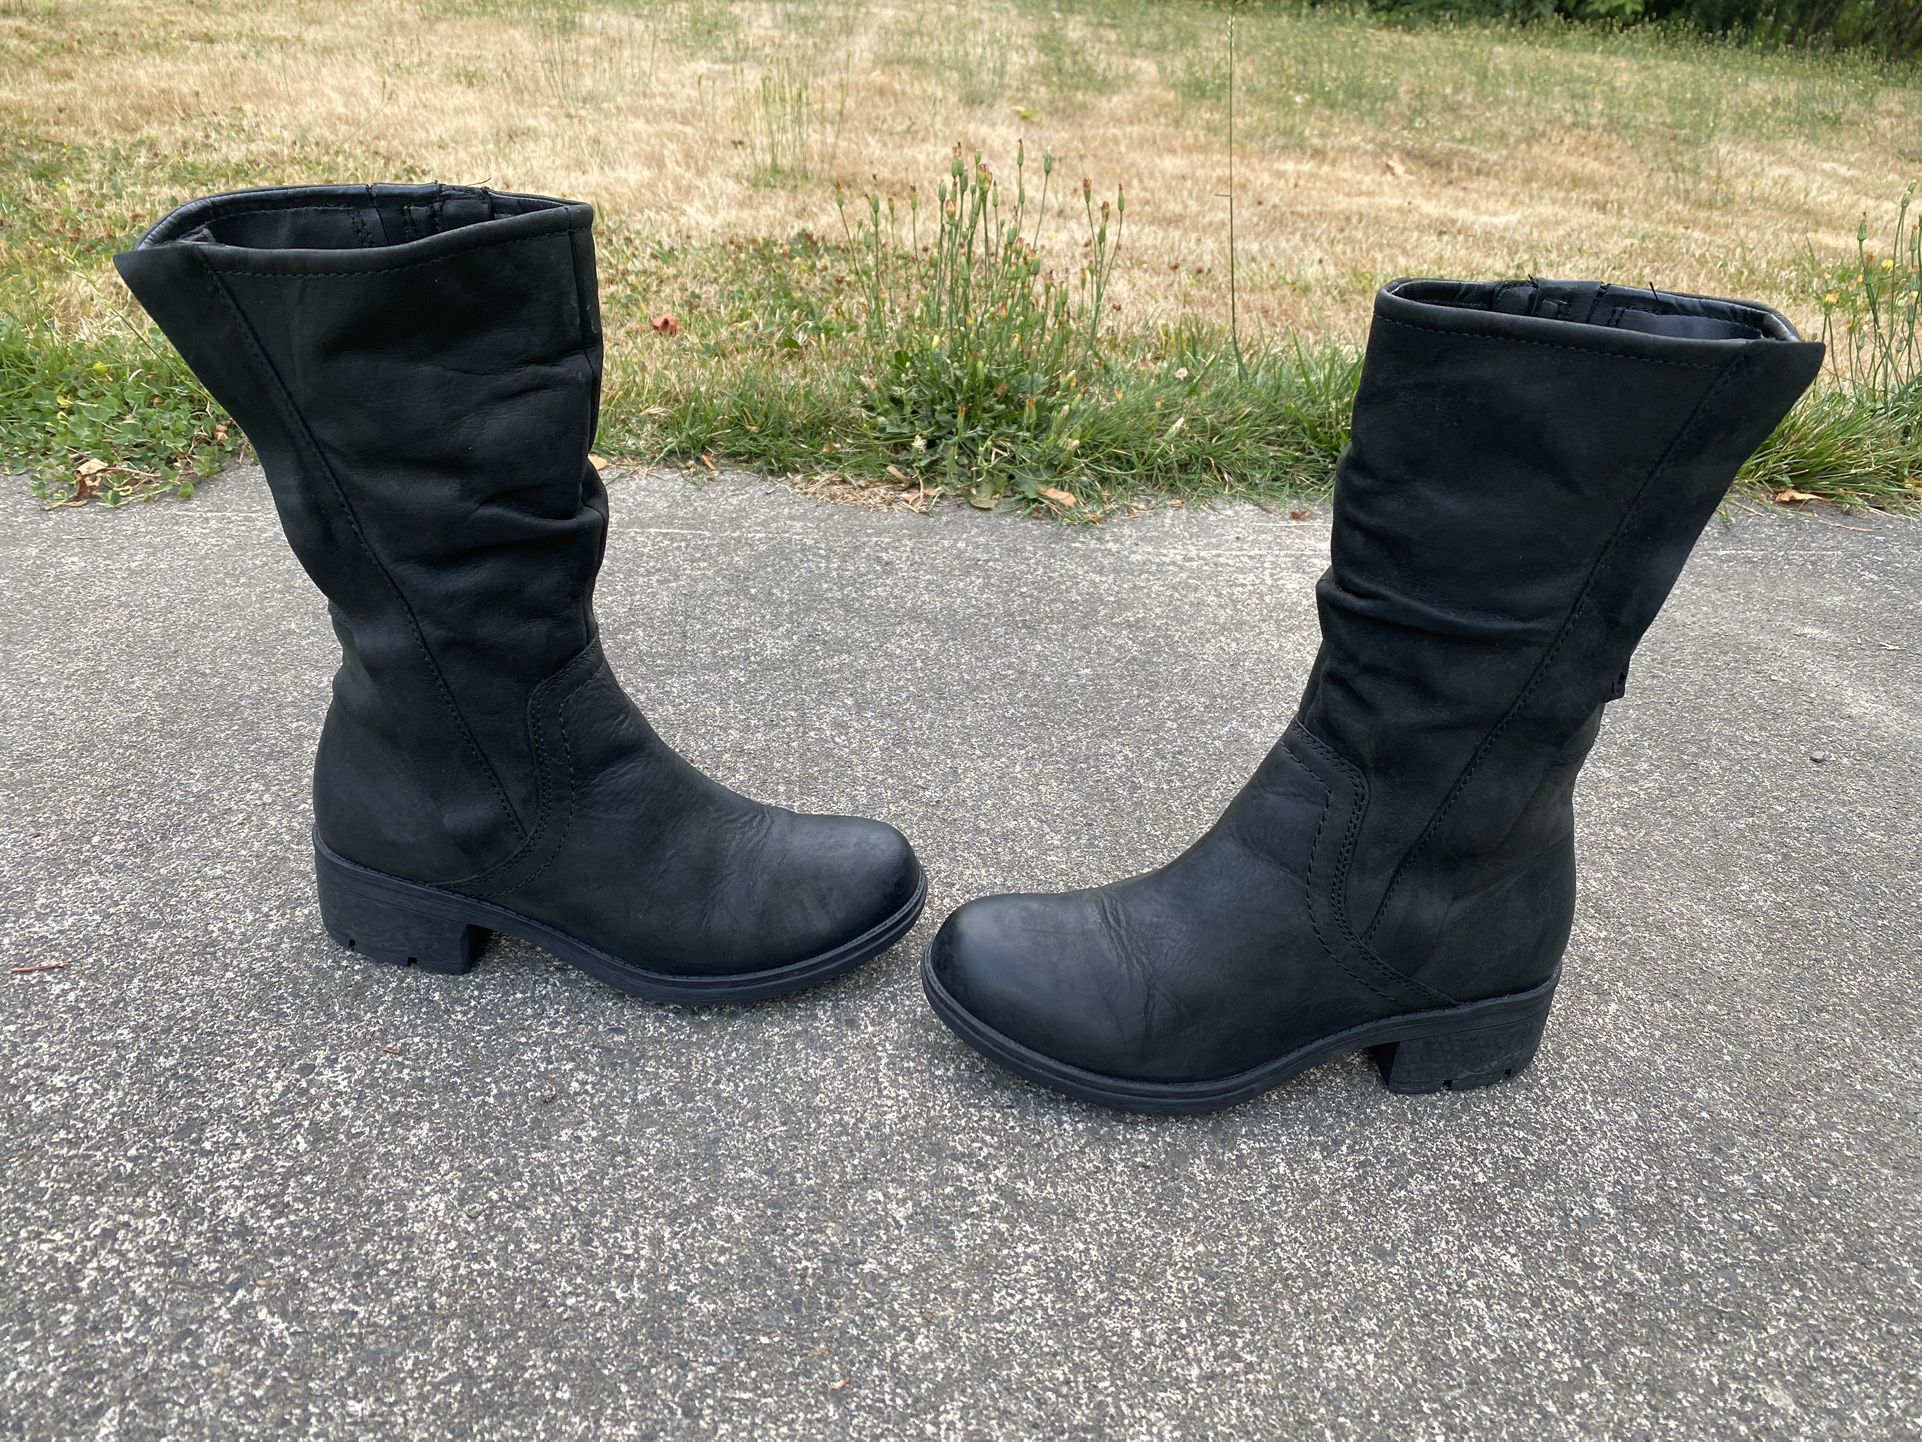 CLARKS ARTISAN MANSI JUNIPER LADIES BLACK COMBAT RIDING SLOUCH BOOTS 8 M for Sale in Puyallup, WA - OfferUp